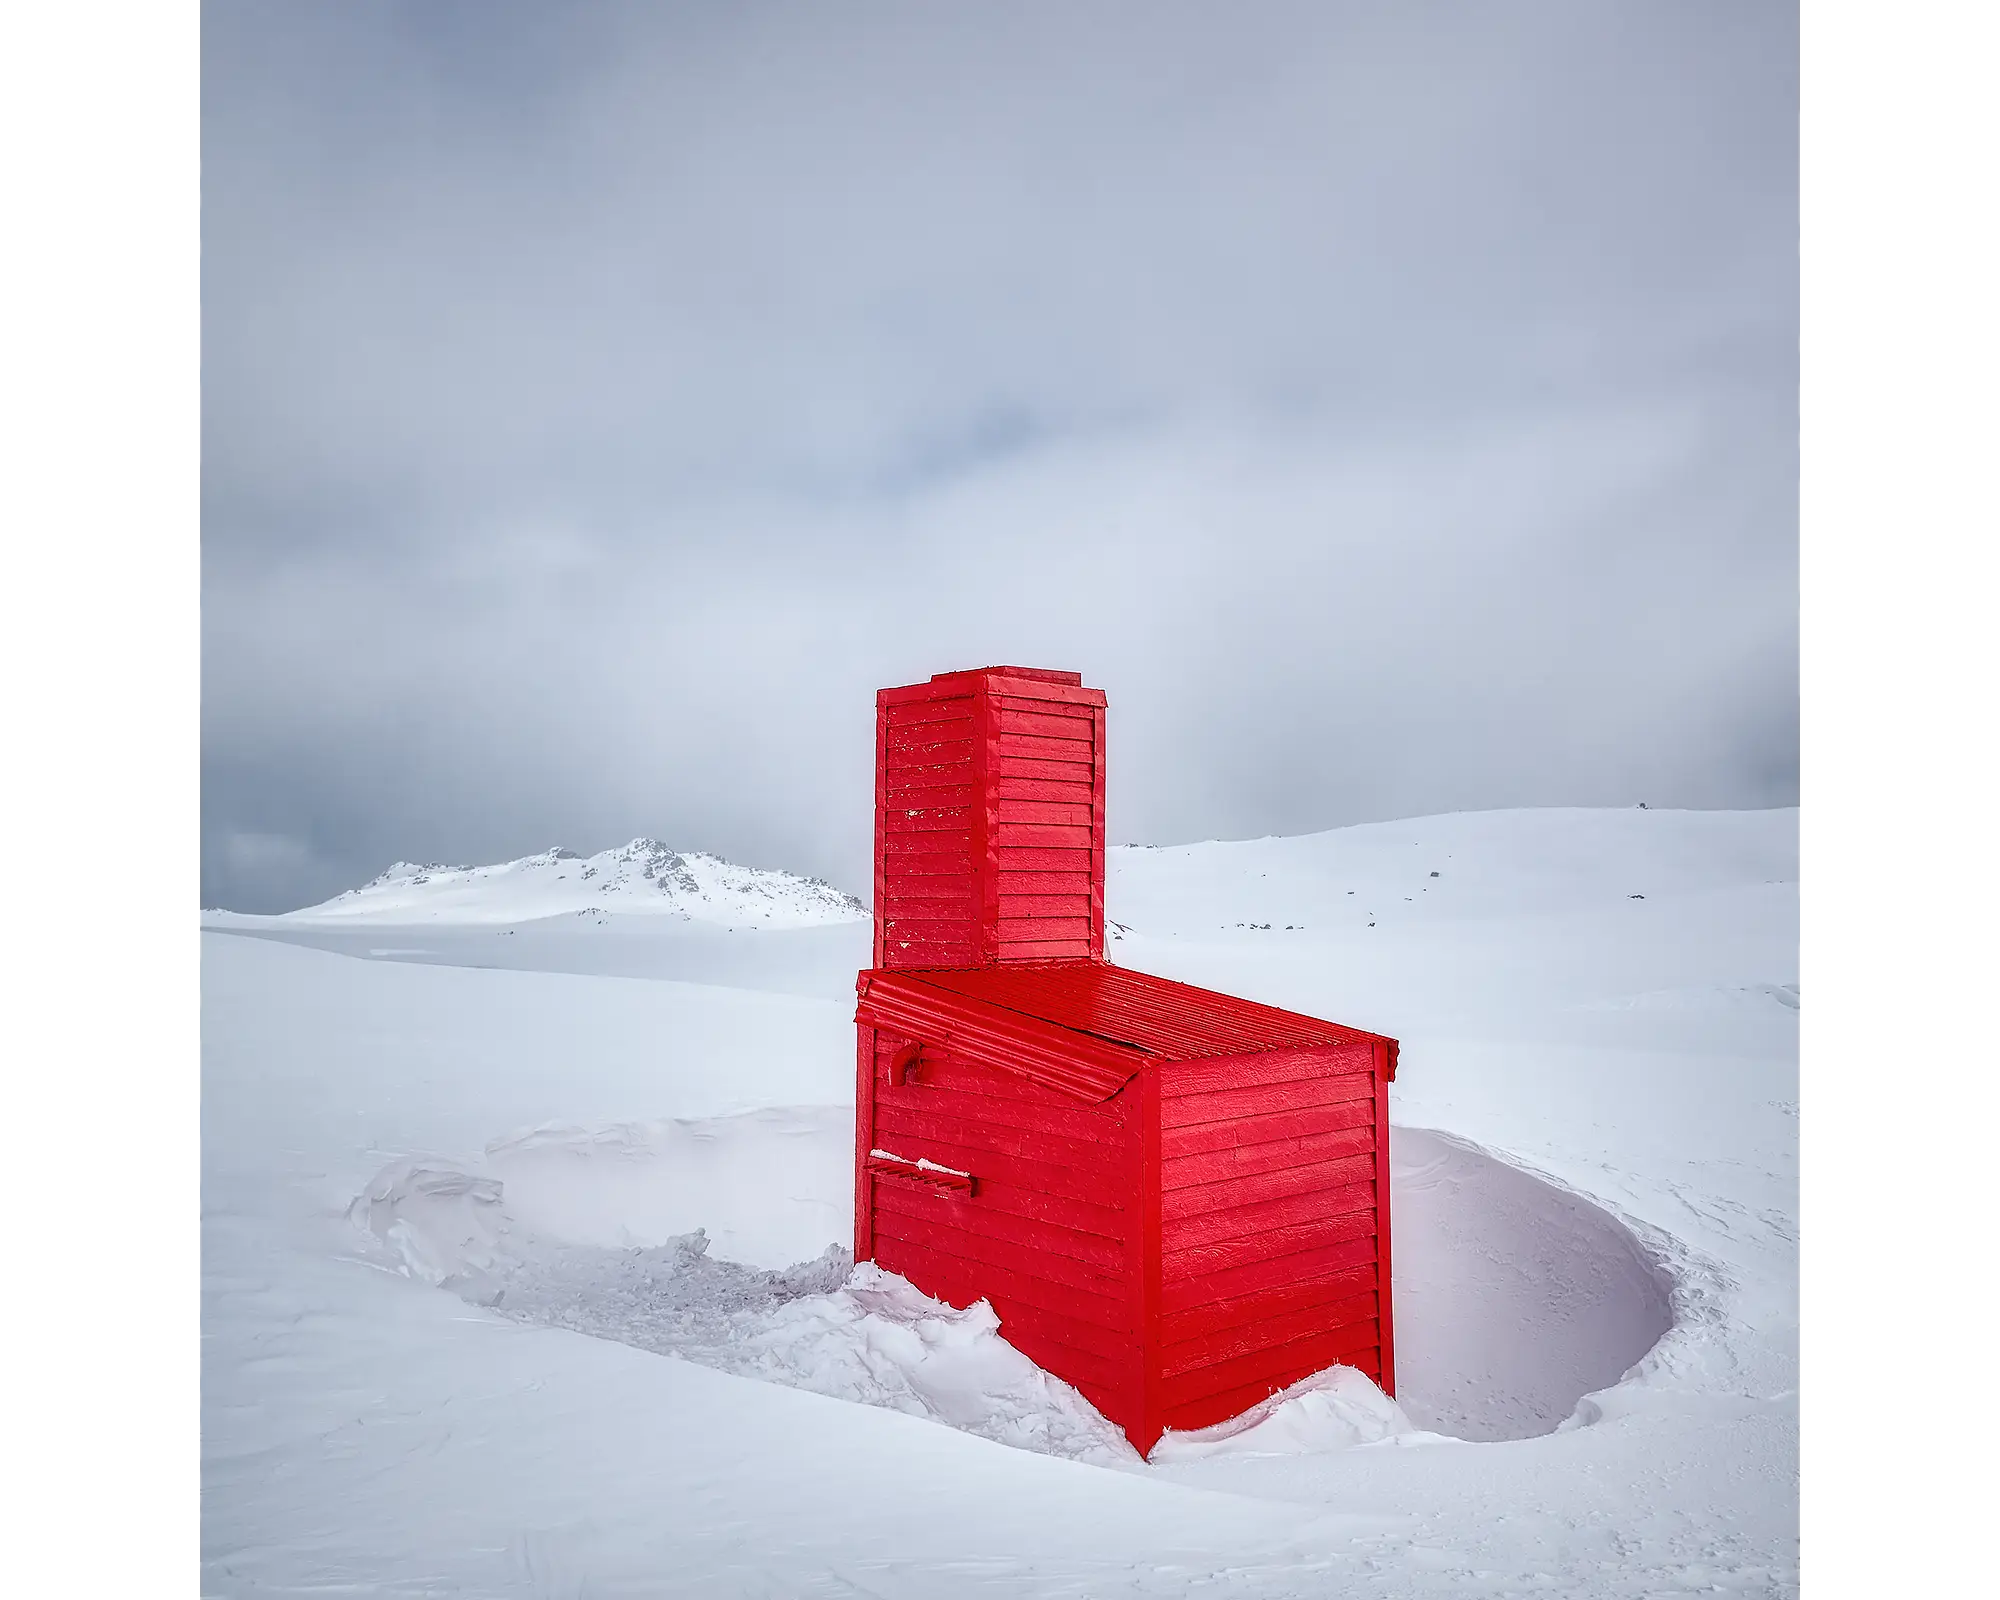 Little Red - Cootapatamba Hut in snow, Kosciuszko National Park.